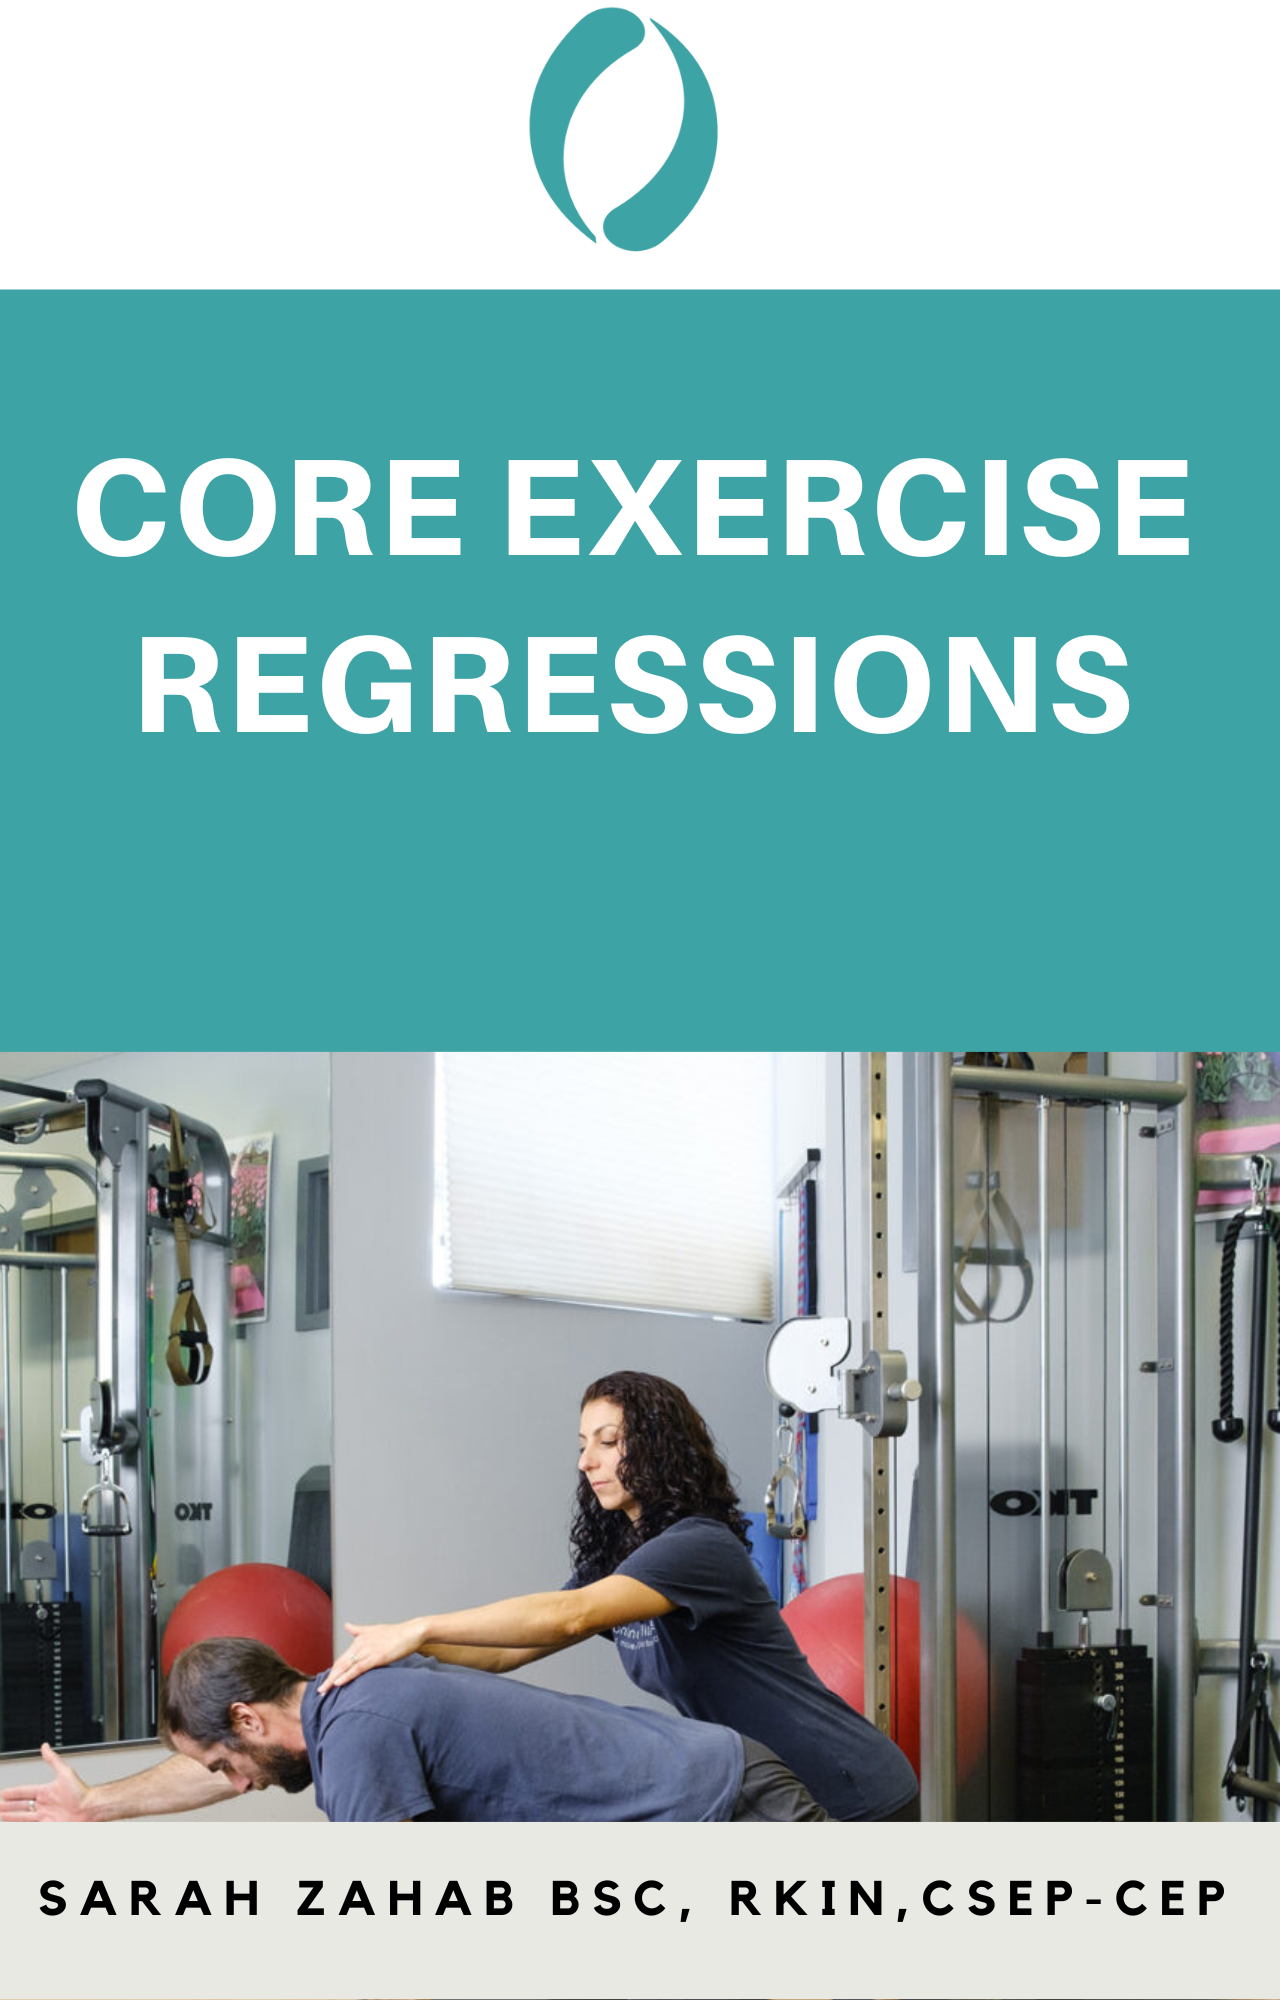 Core Exercise Regressions COMING SOON